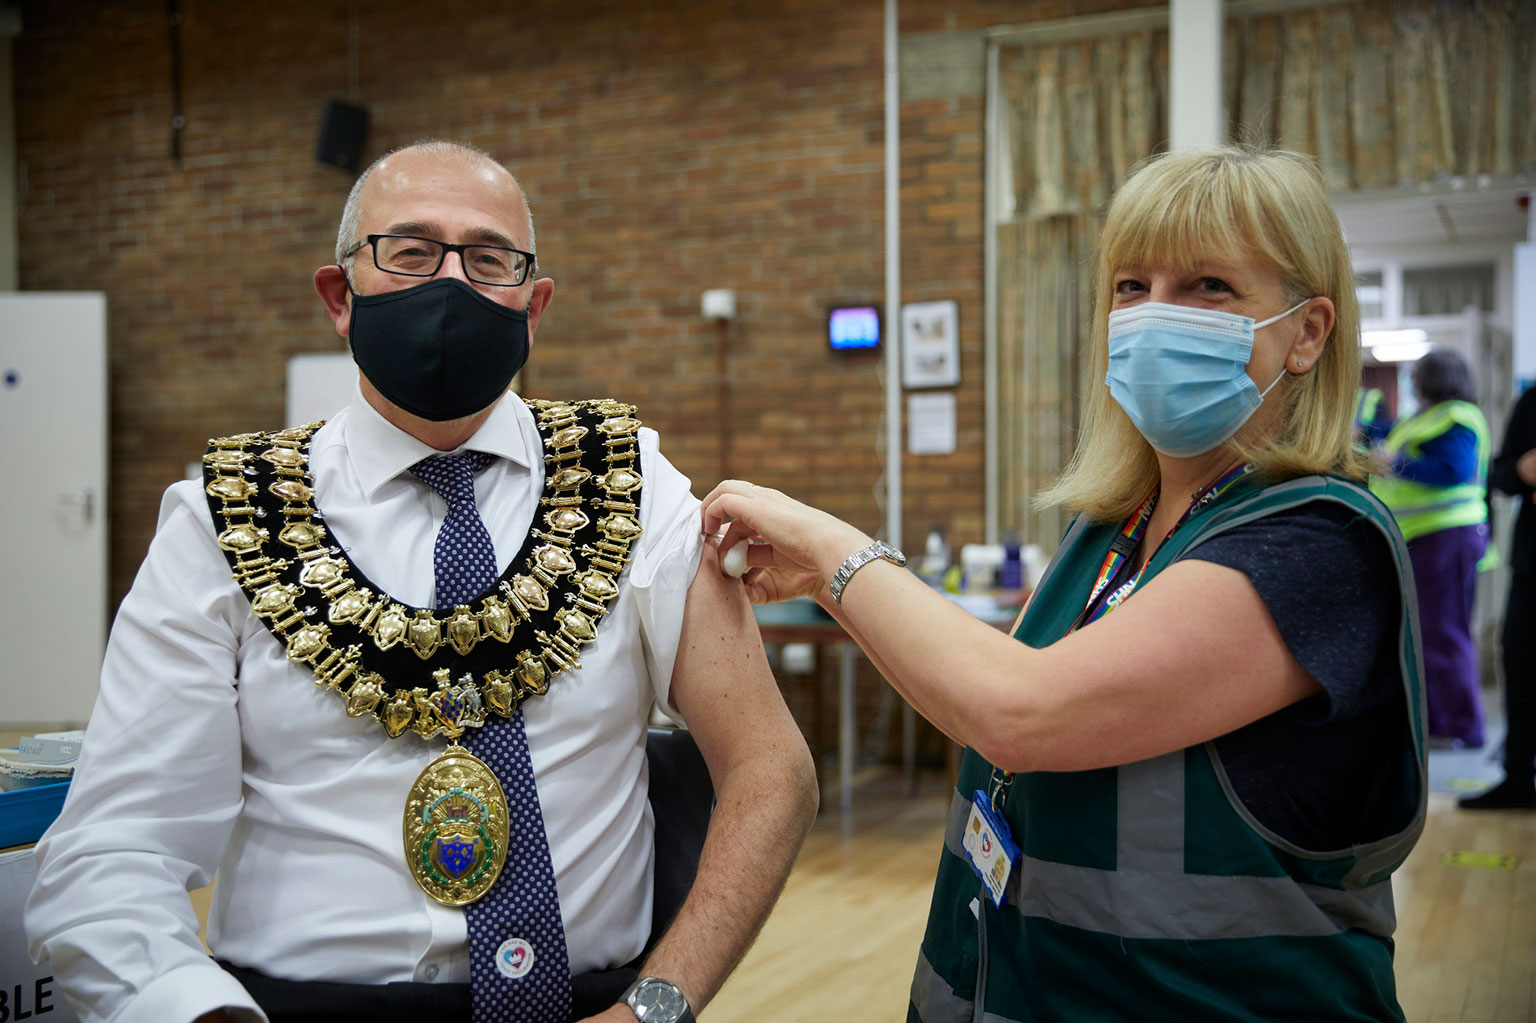 A shot in the arm for Stockport’s new Mayor!